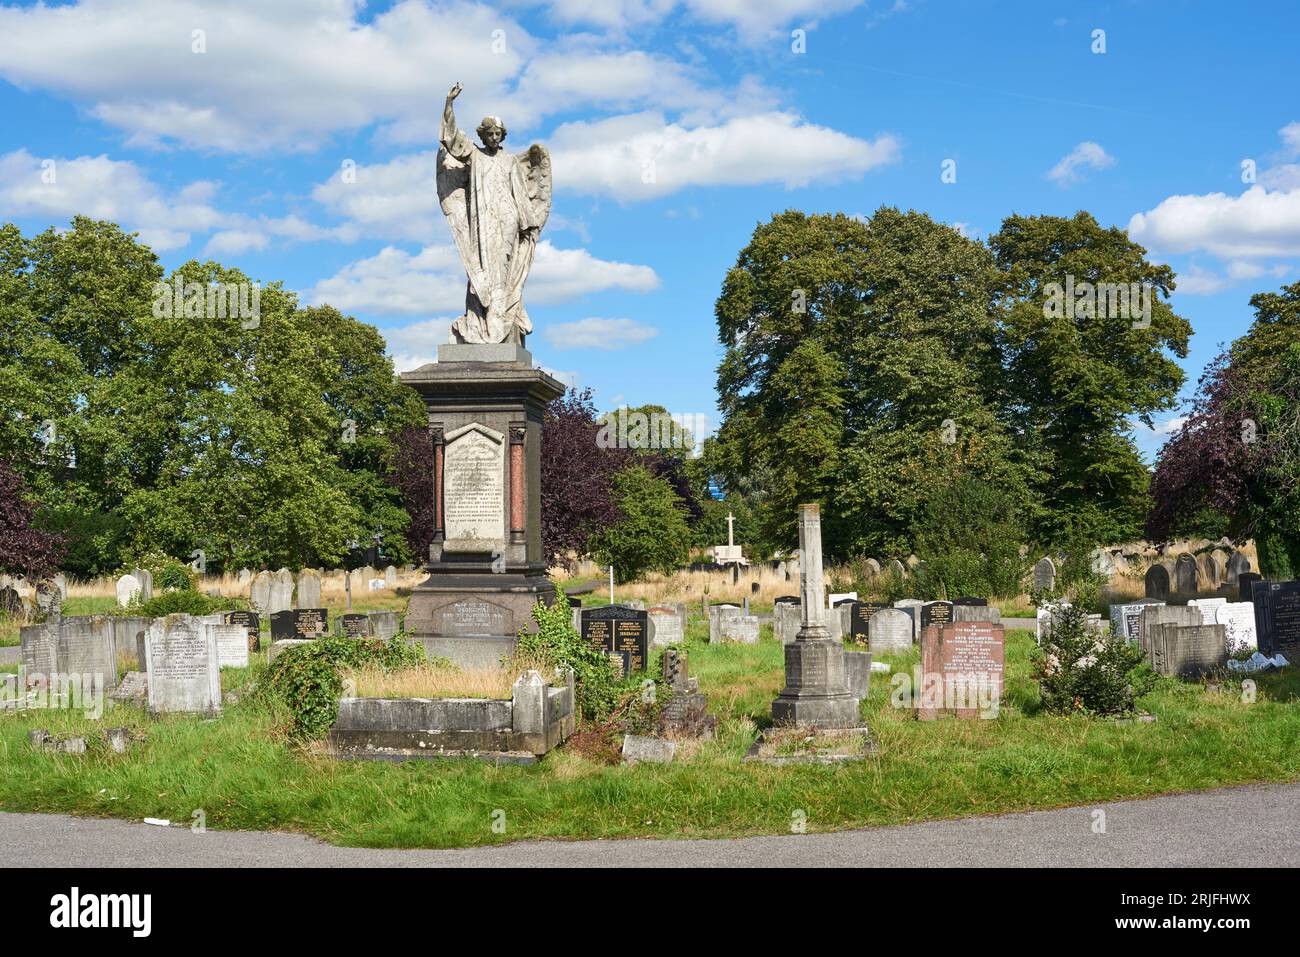 Monuments and gravestones at Great Ilford Cemetery, now known as Buckingham Road Cemetery, in the town of Ilford, Greater London UK Stock Photo